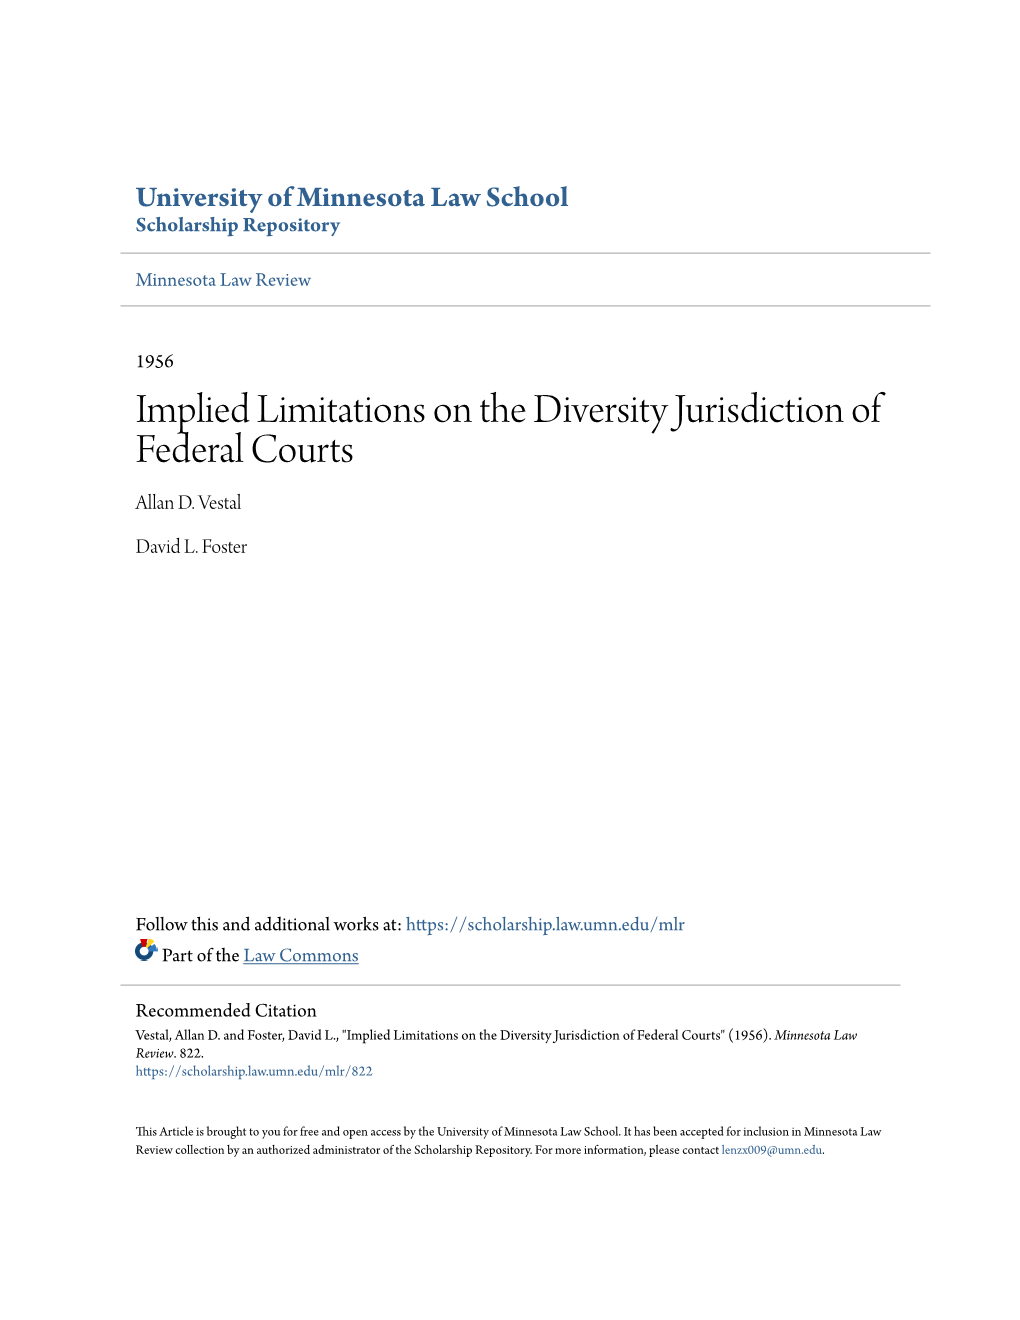 Implied Limitations on the Diversity Jurisdiction of Federal Courts Allan D